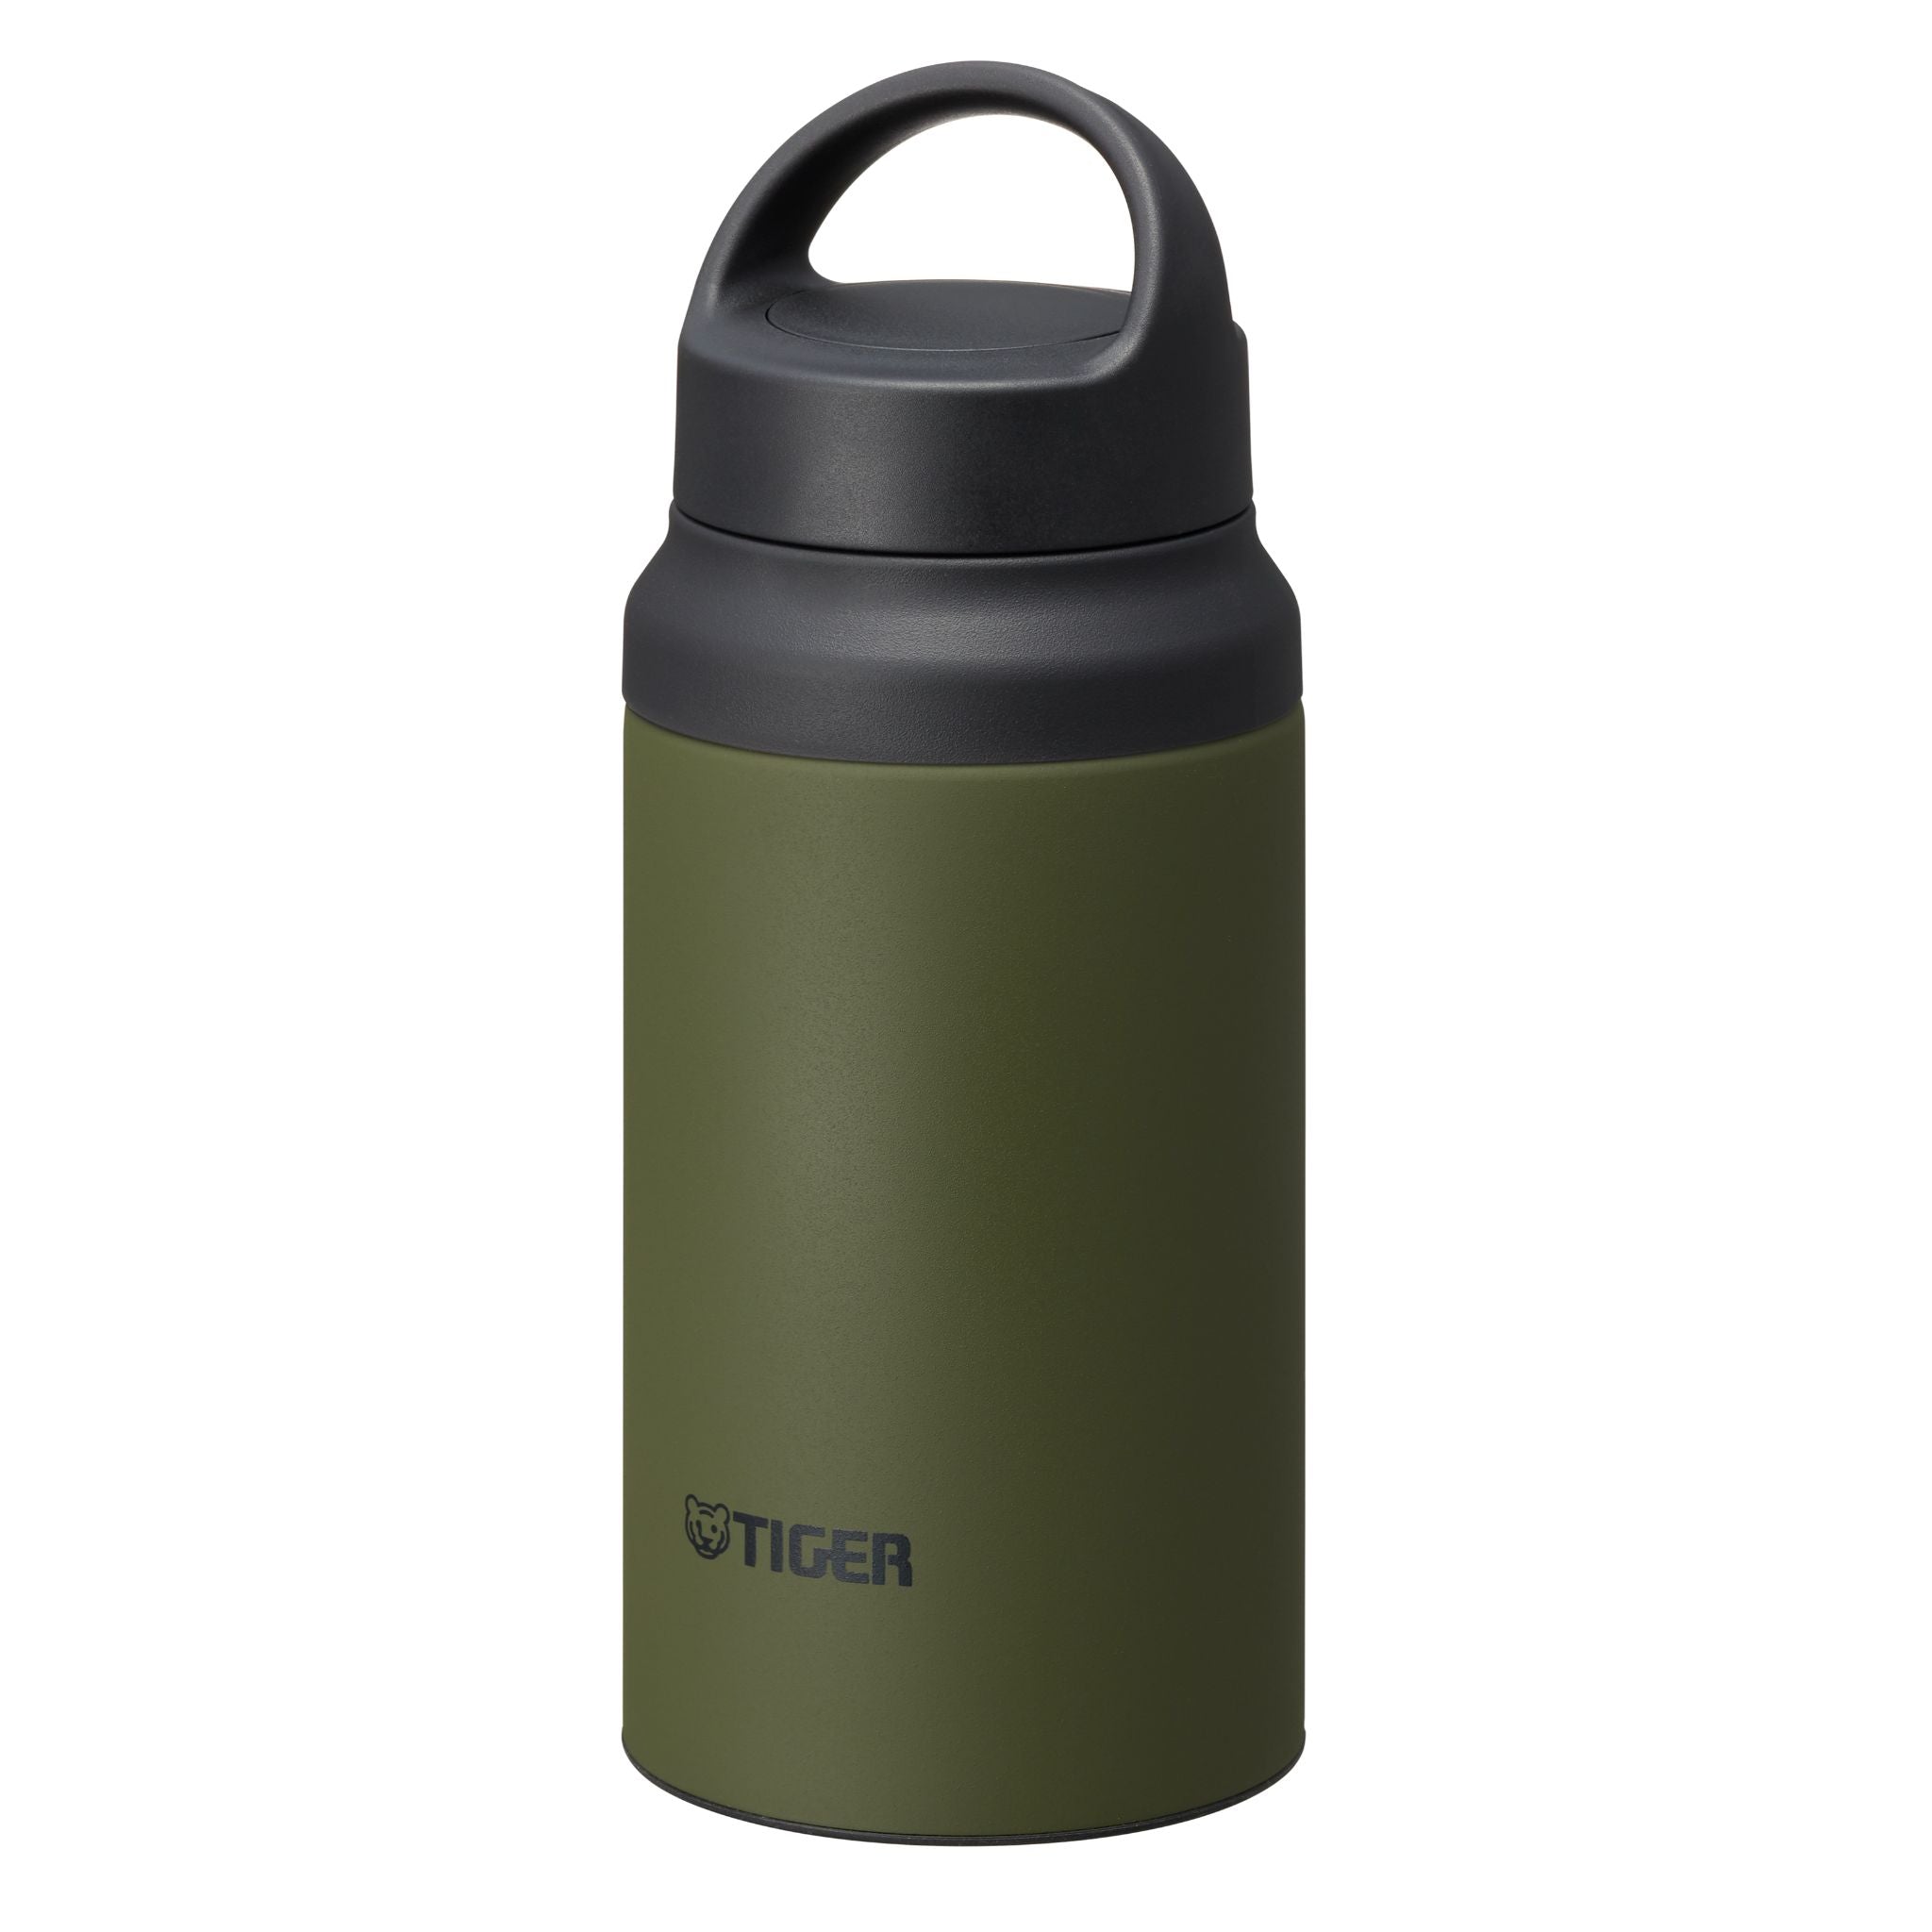 Tiger 0.4LT Vacuum Insulated Antibacterial Stainless Steel Bottle (GZ) - Moss Forest (HEA-MCZ-S040-GZ)